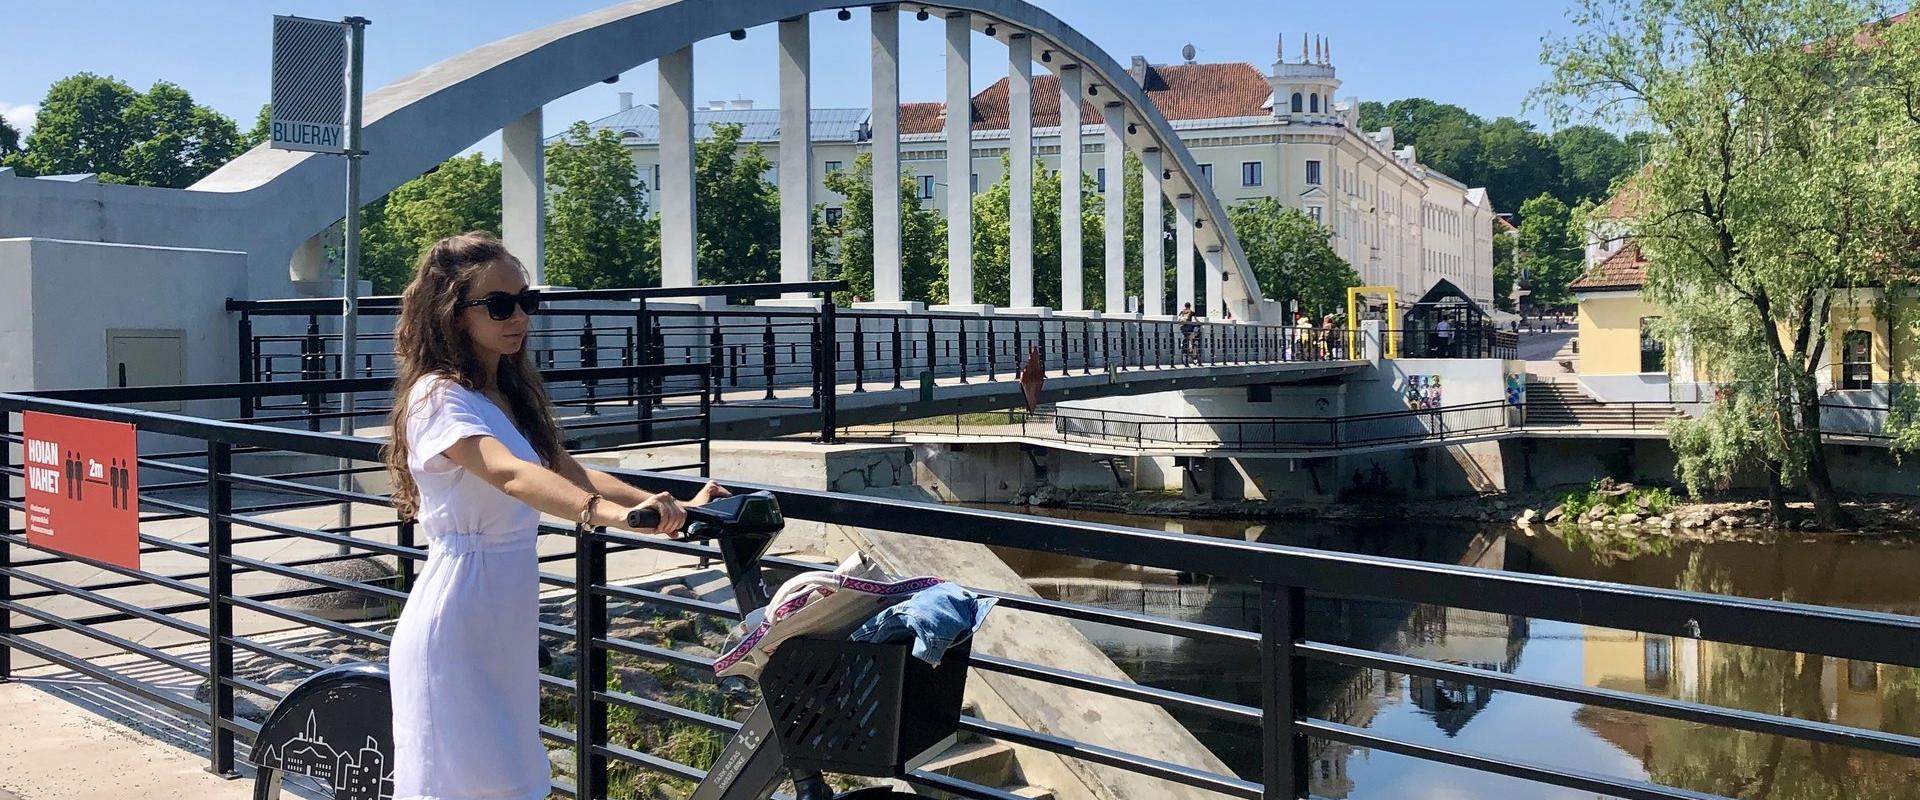 Arch Bridge and a girl standing next to a bike of the Tartu bike sharing circuit